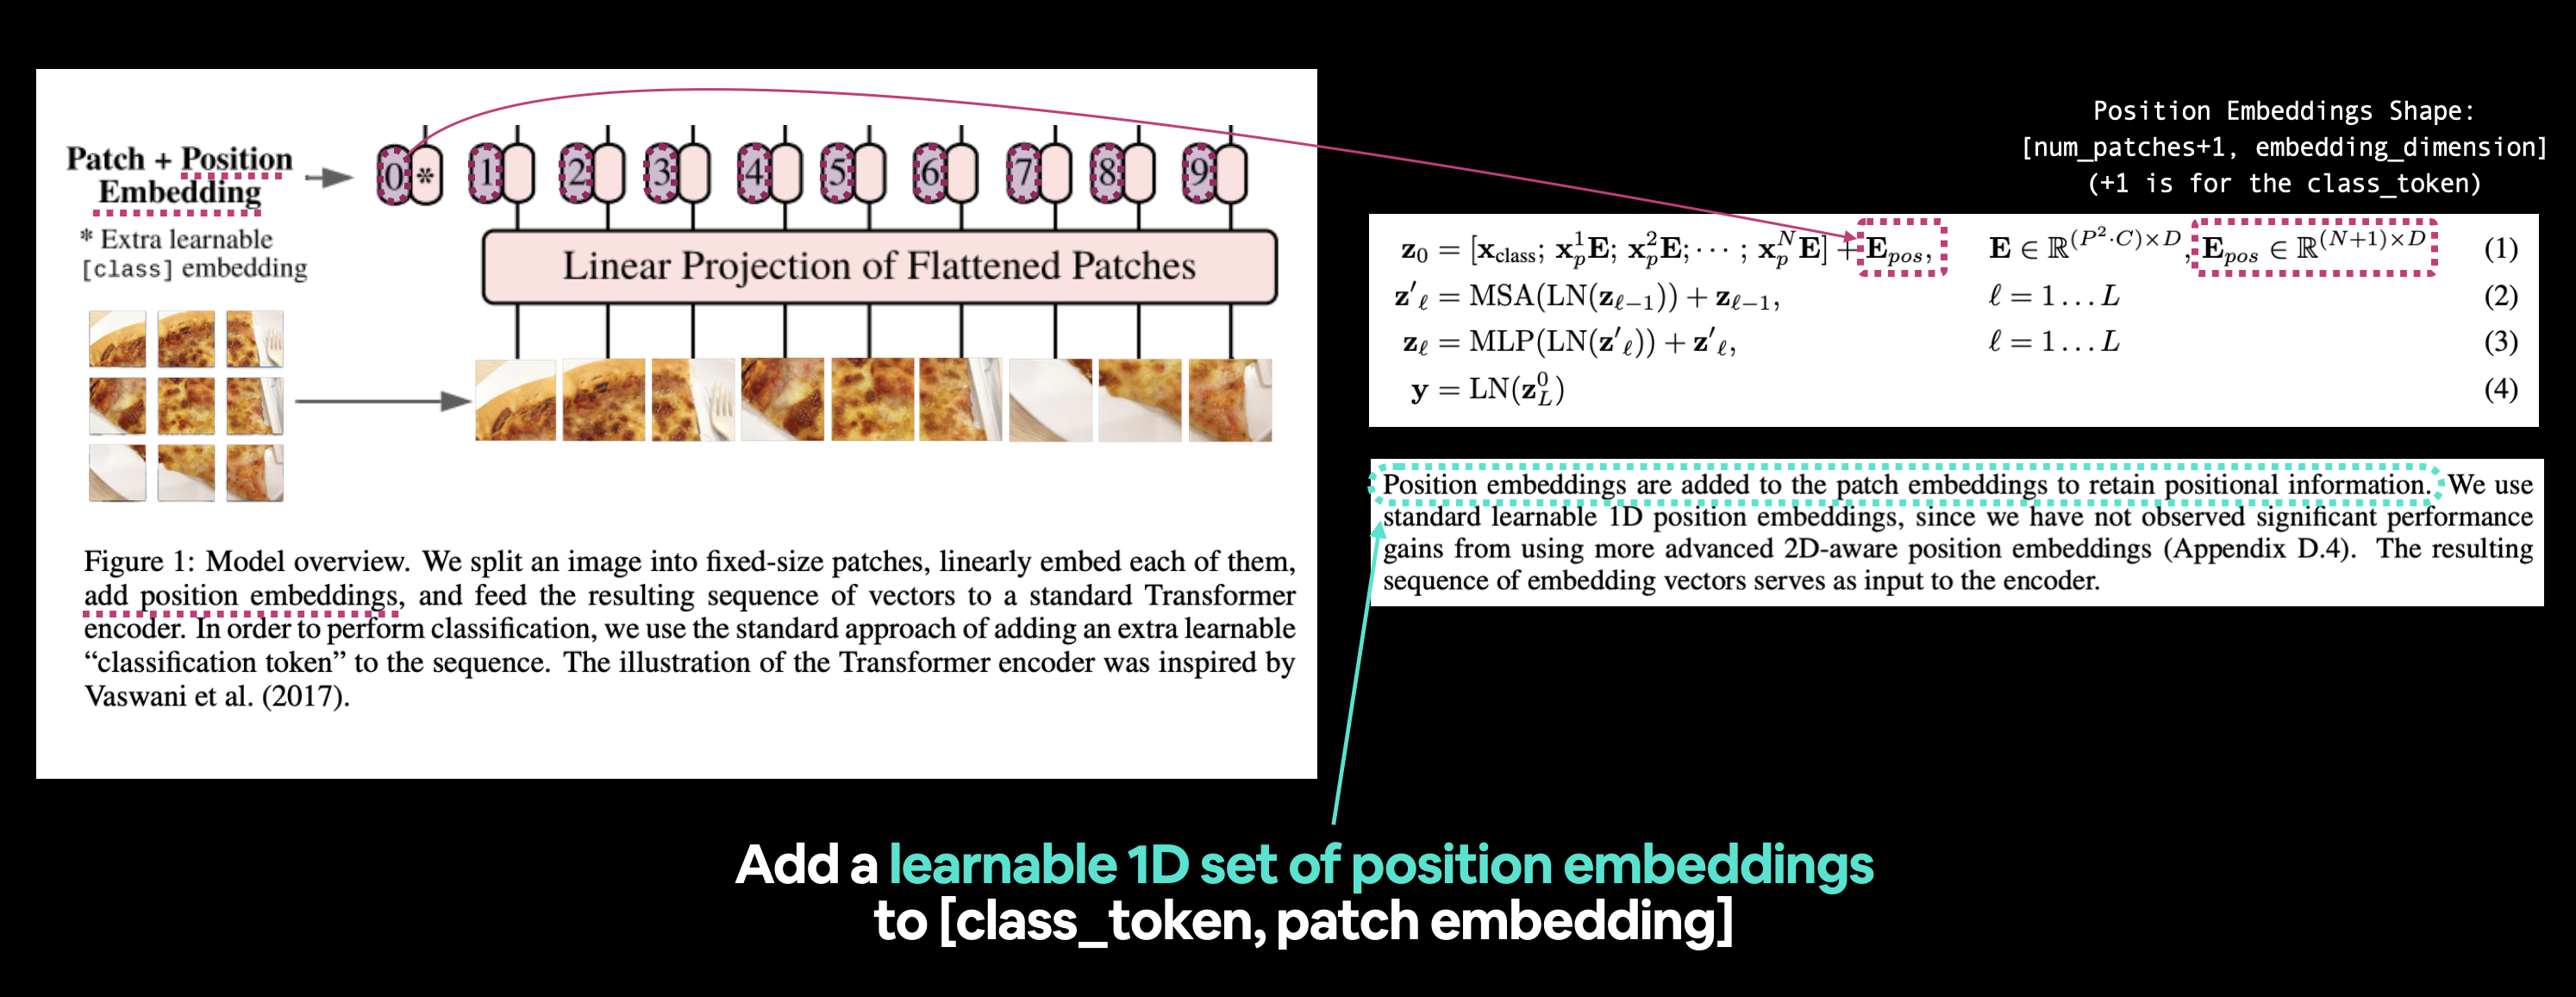 extracting the position embeddings from the vision transformer architecture and comparing them to other sections of the vision transformer paper